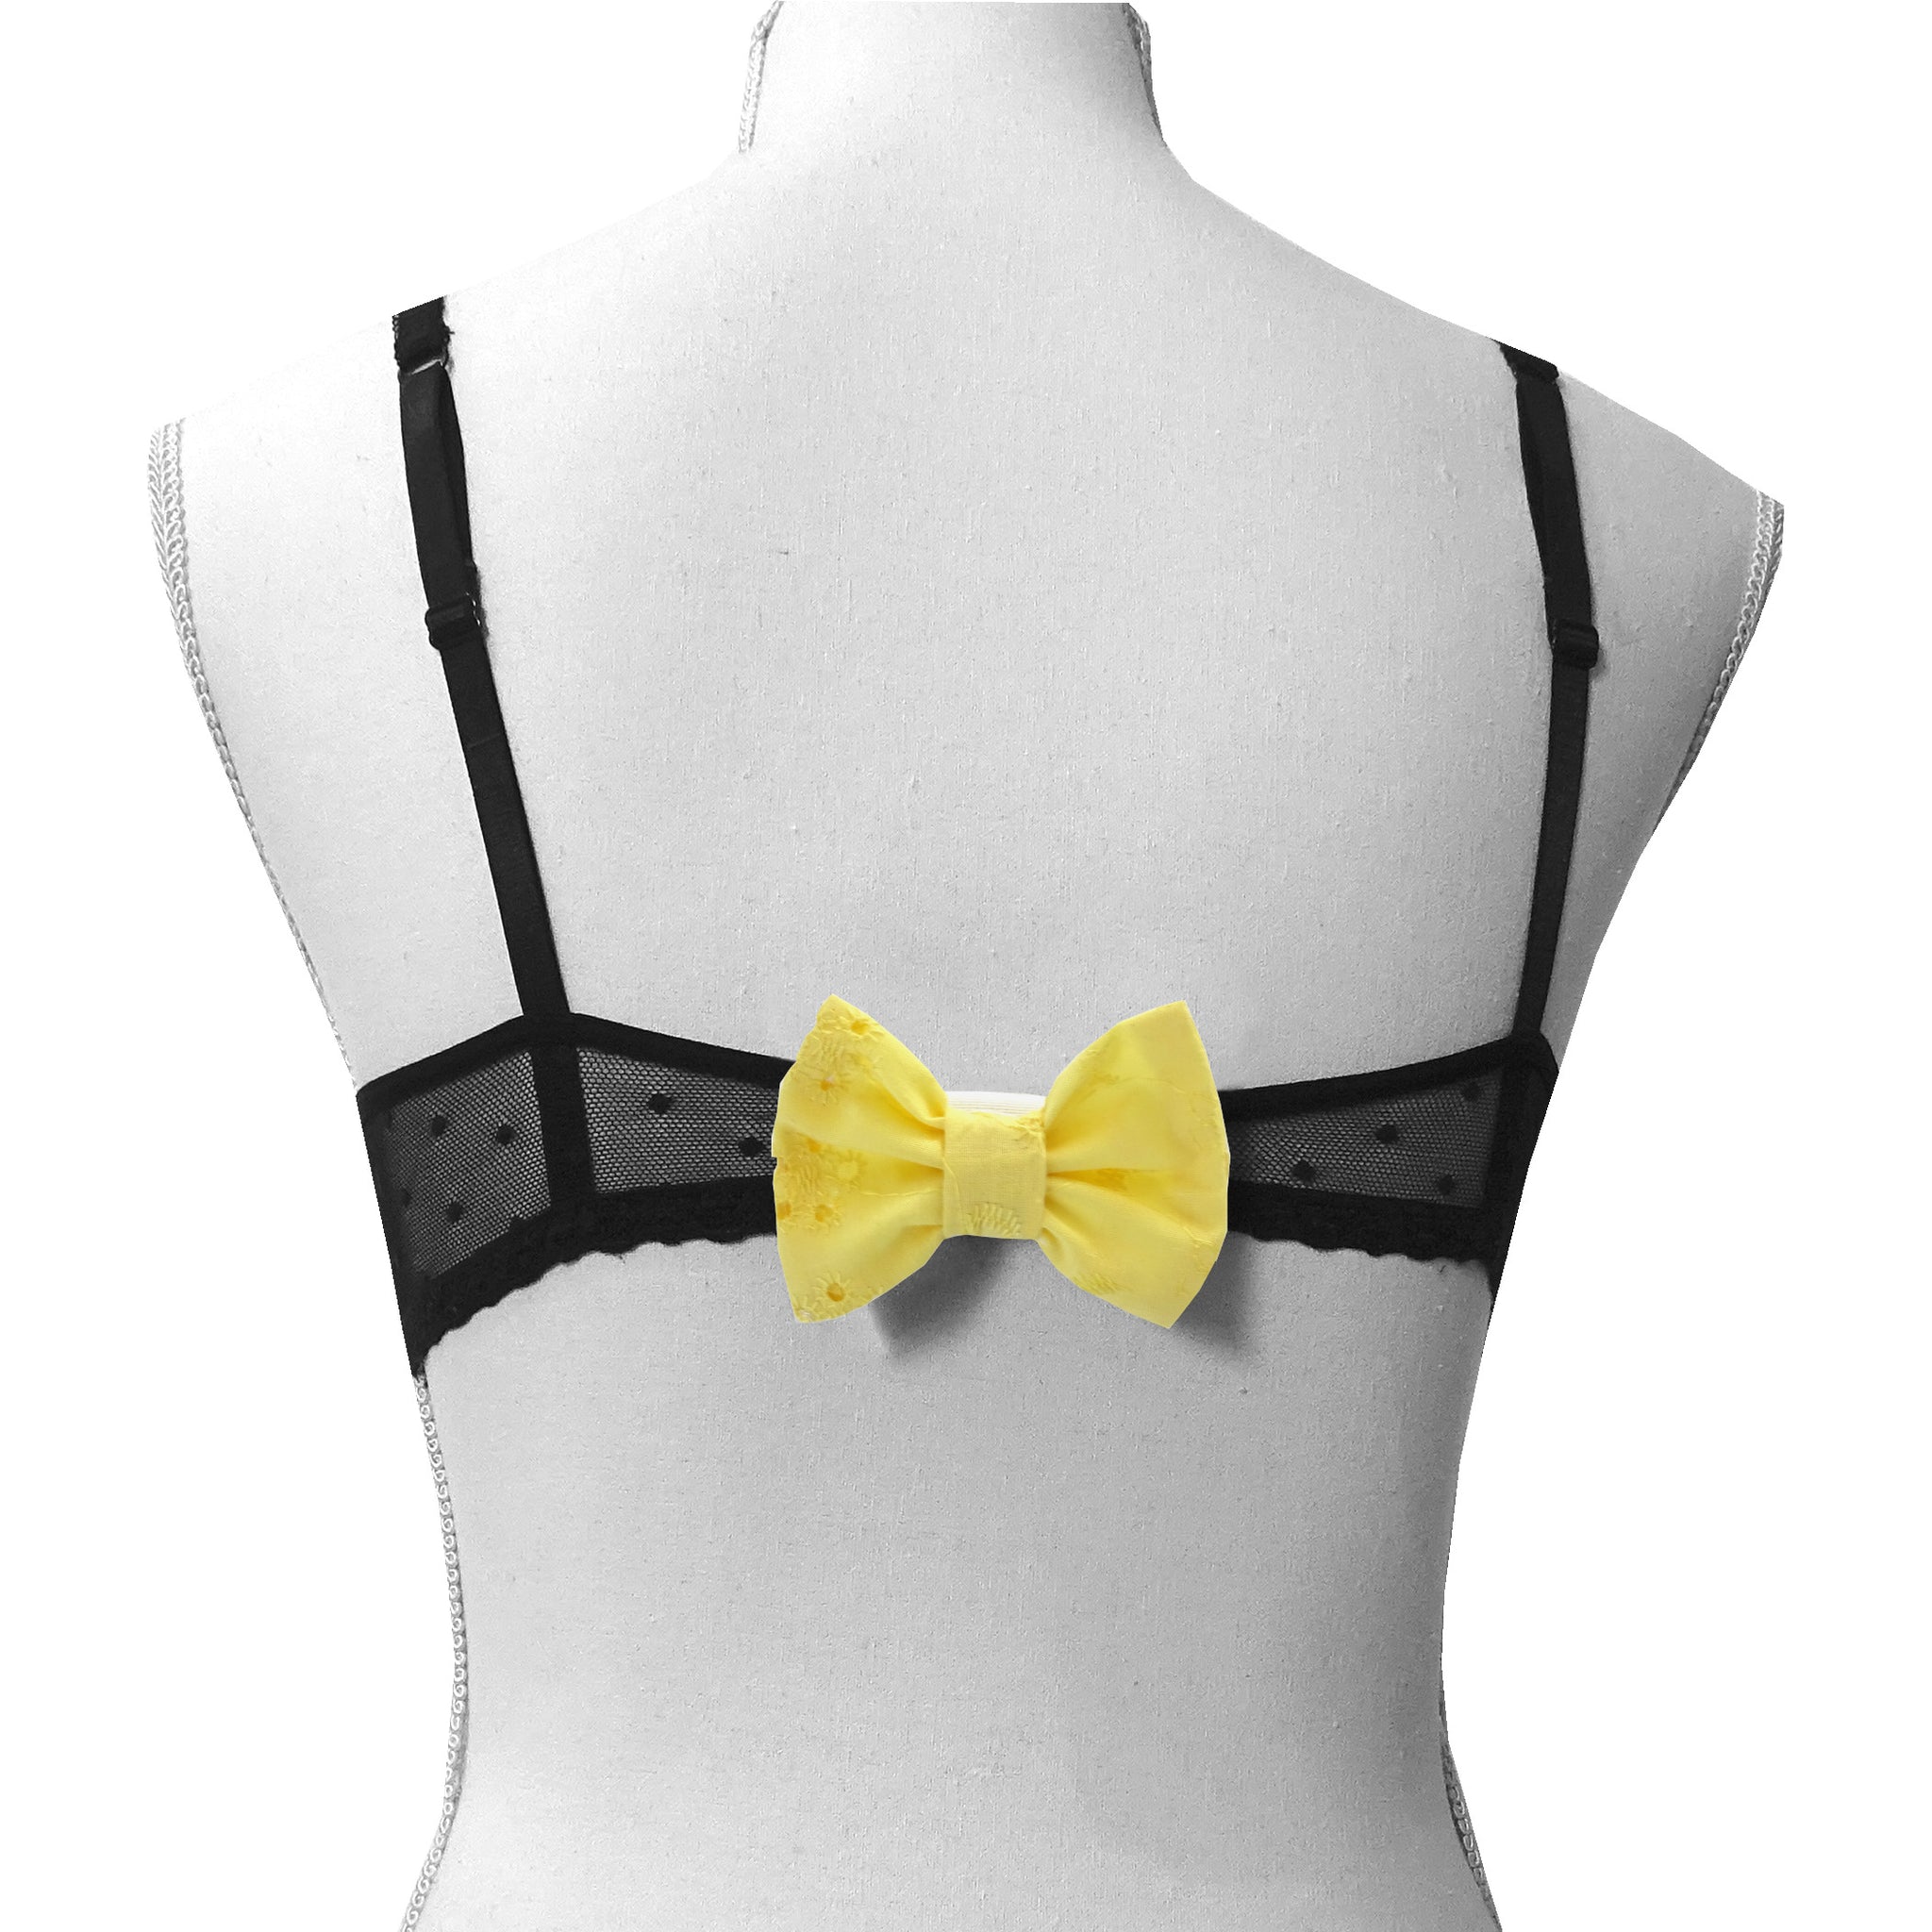 Noeud cache-agrafes de soutien-gorge Atelier Madeleine made in France jaune broderie